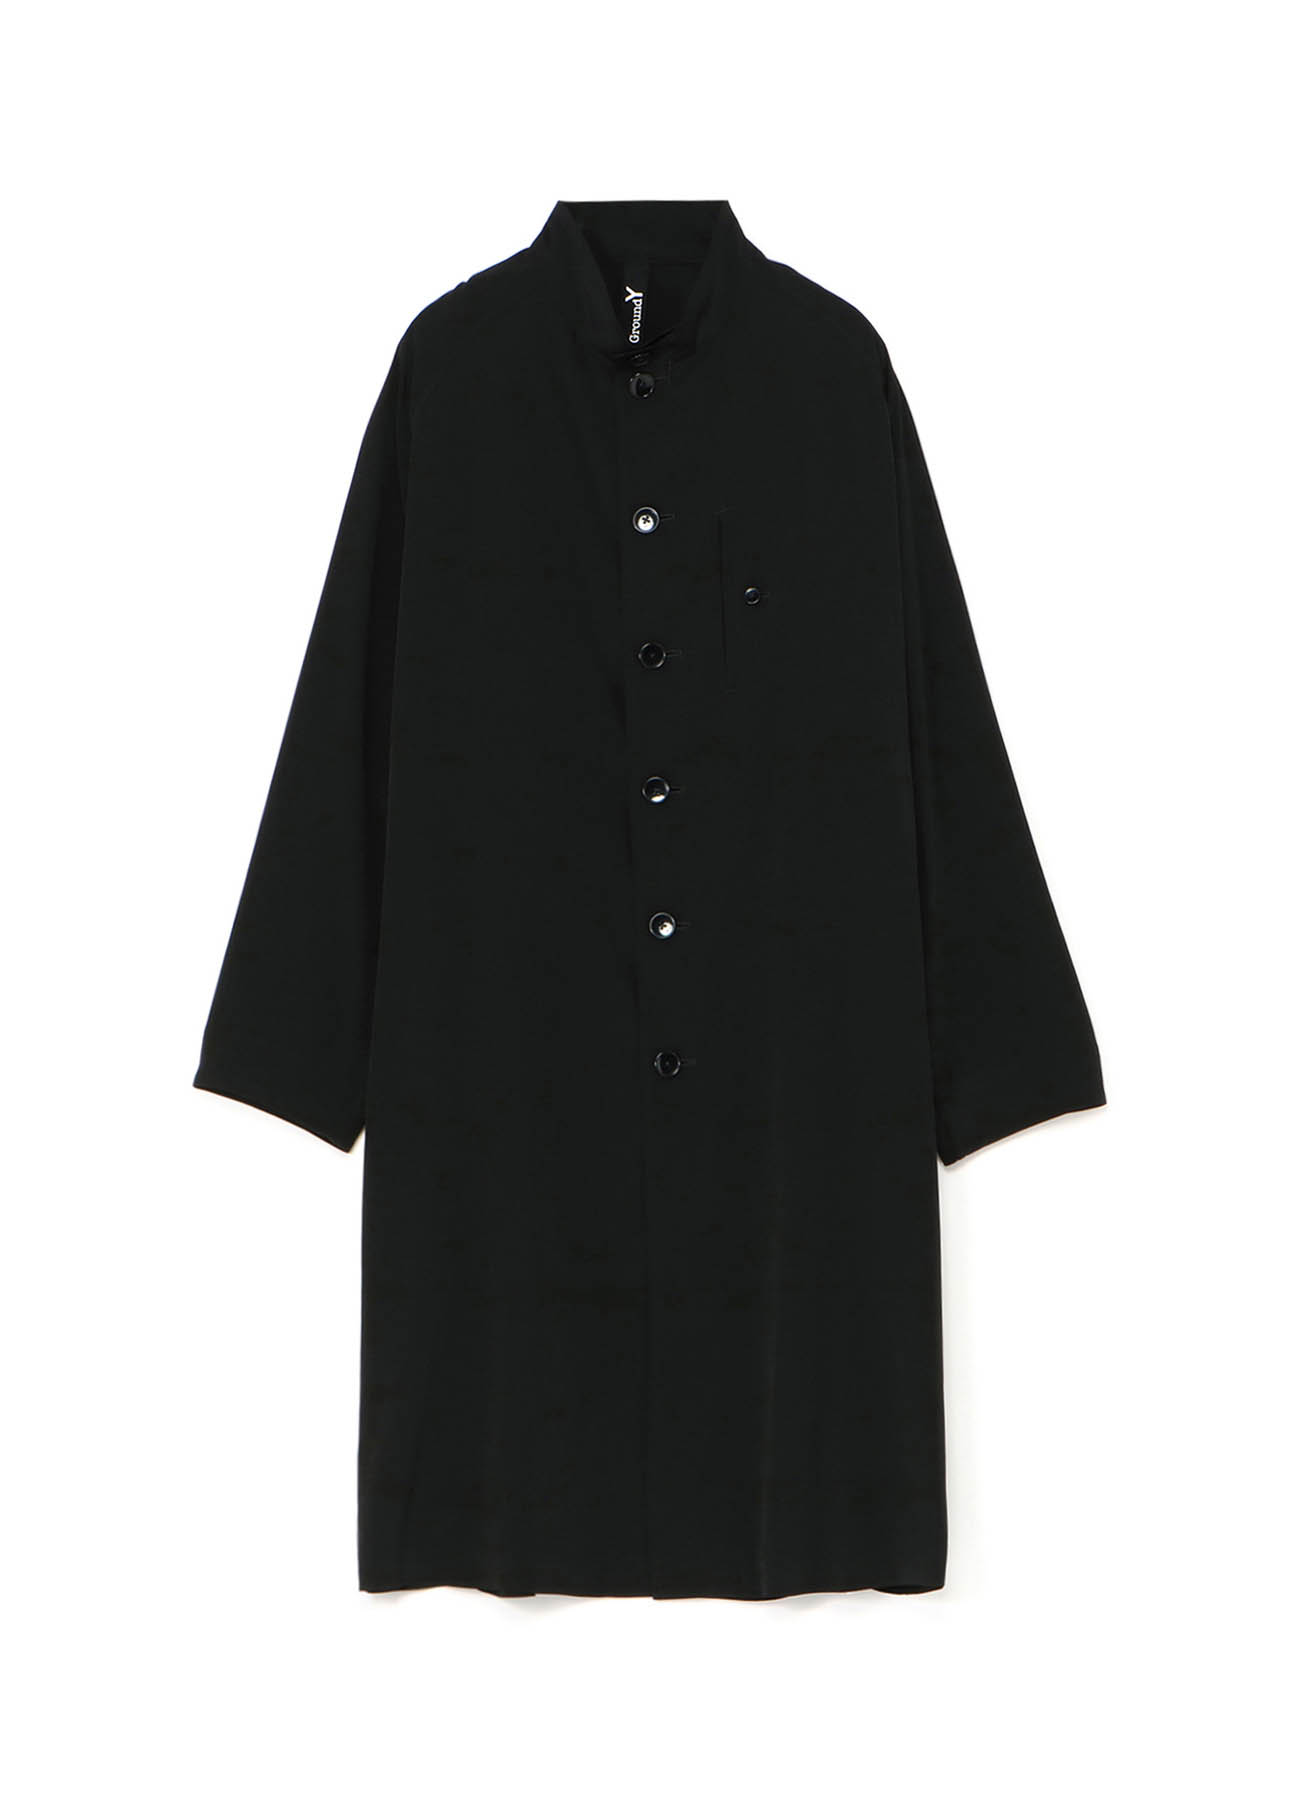 T/A vintage decyne Stand collar single coat